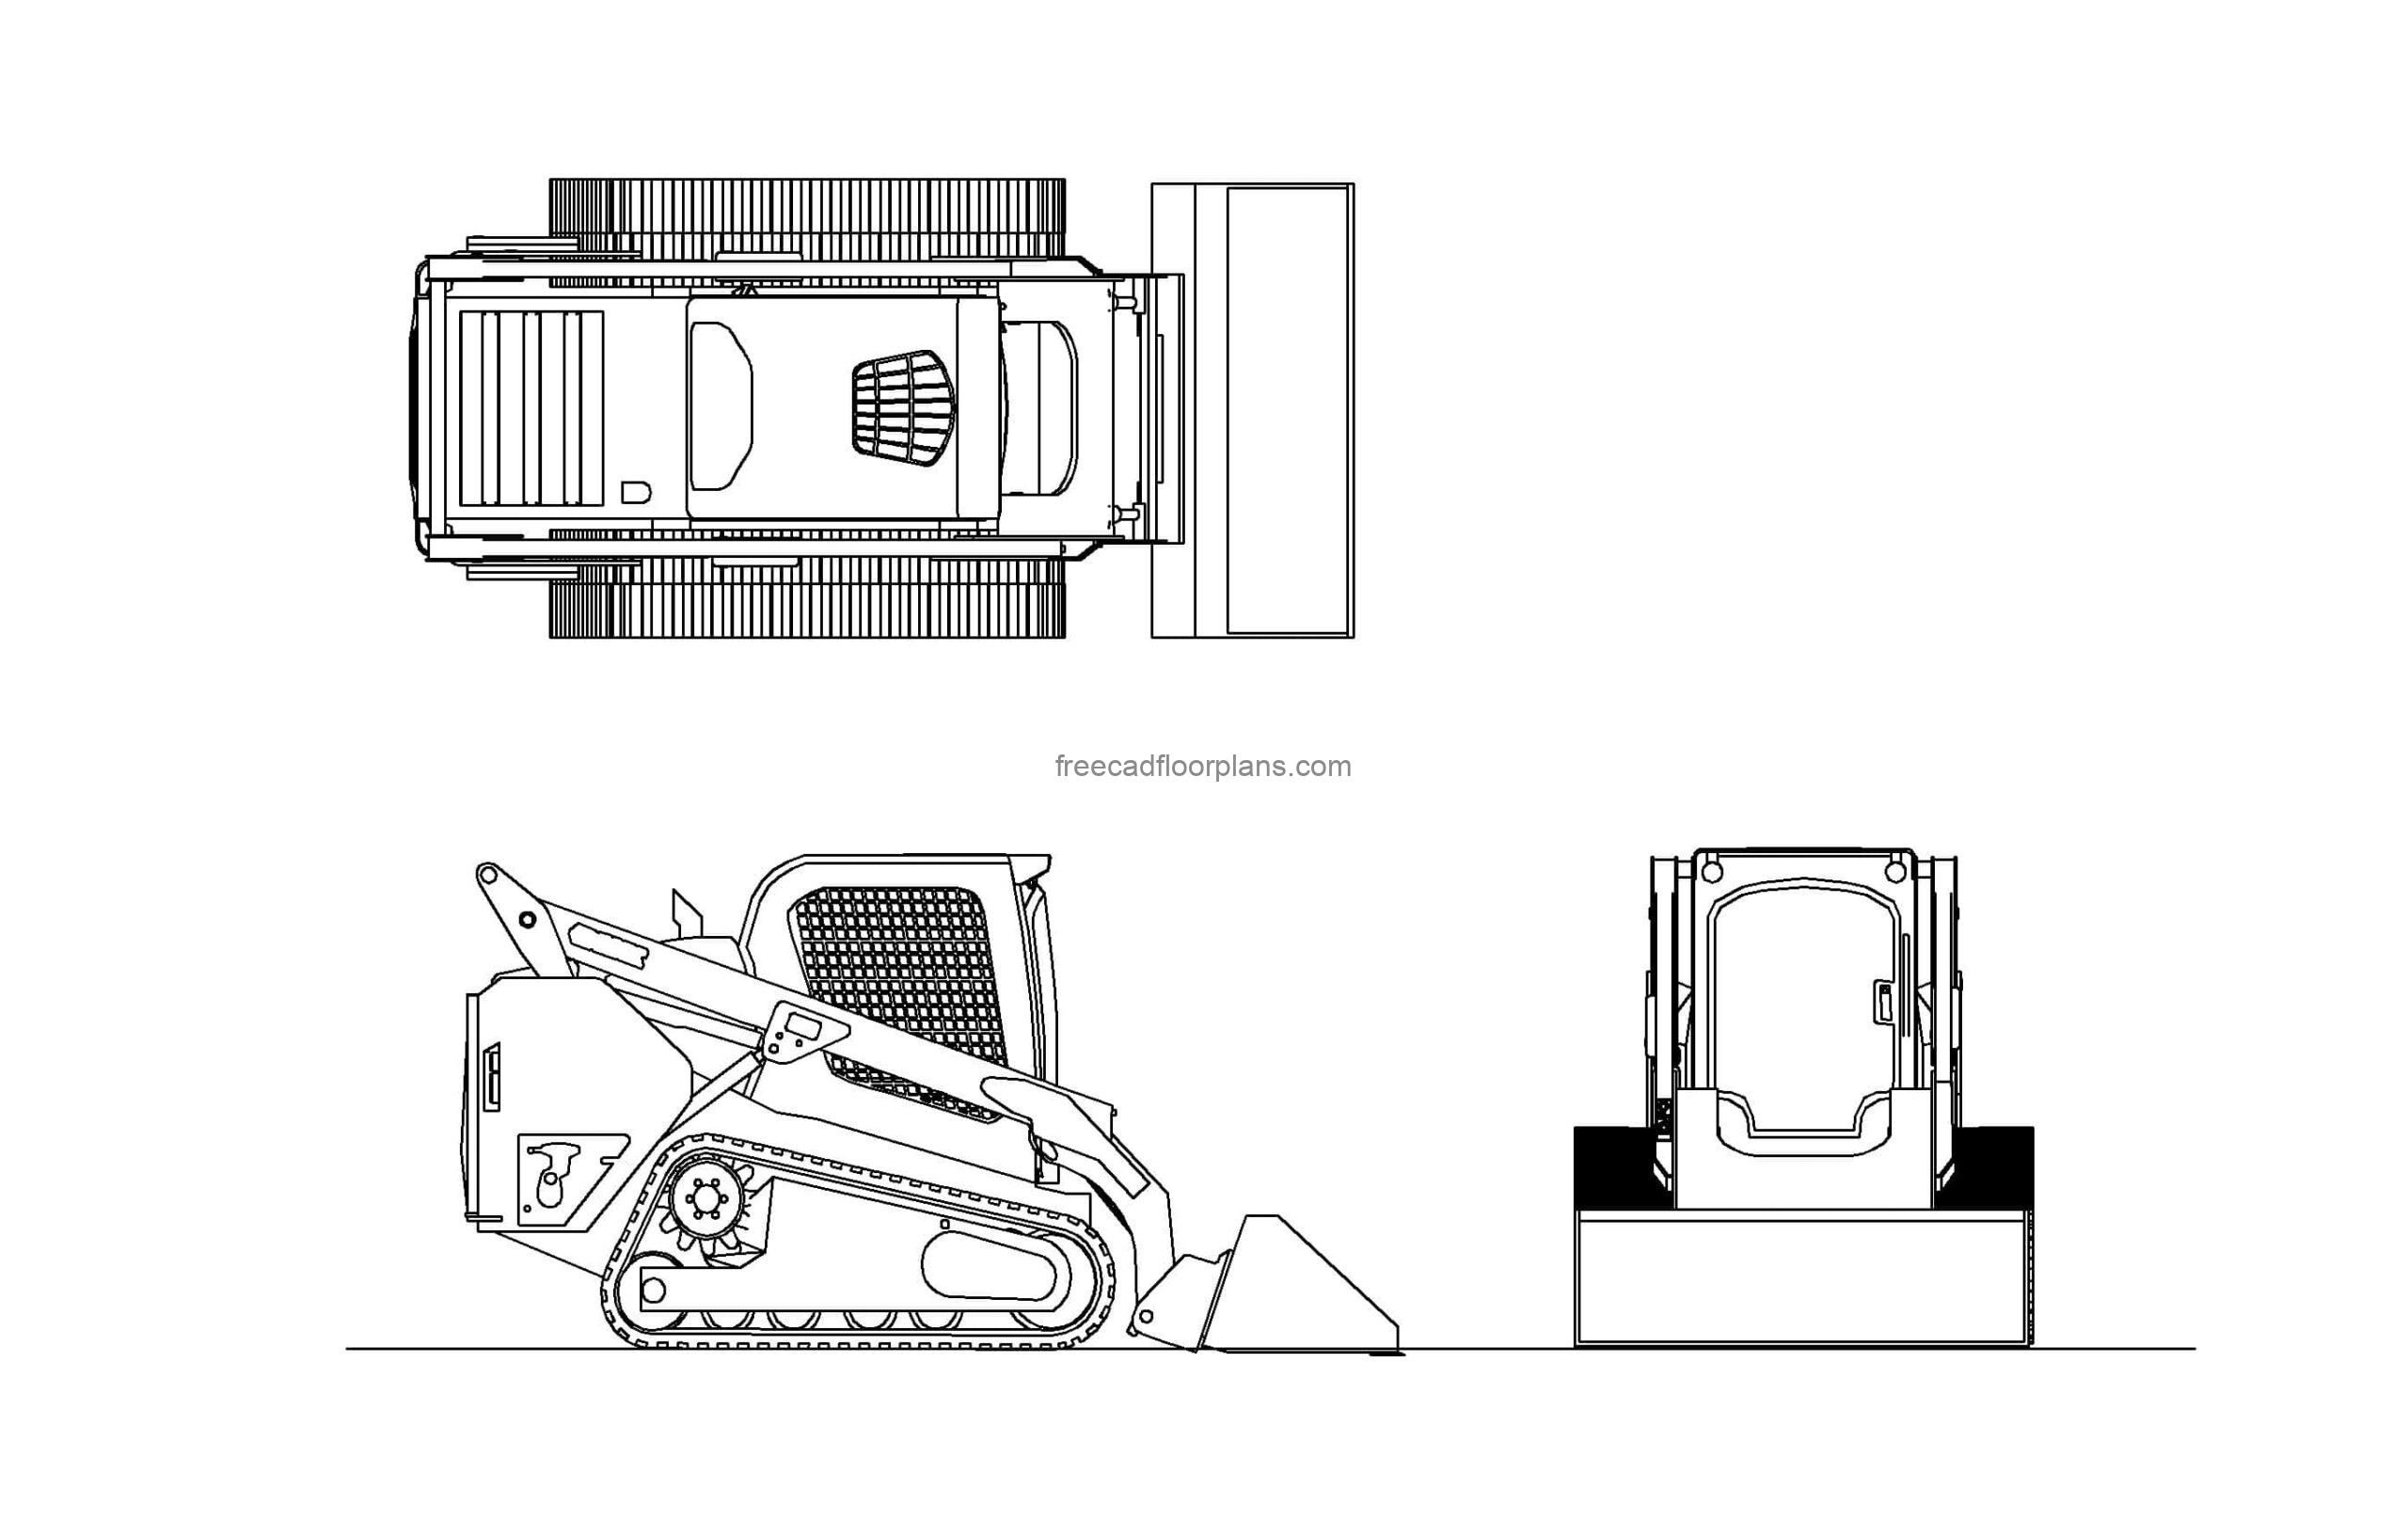 skid steer autocad drawing plan and elevation 2d view dwg file for free download